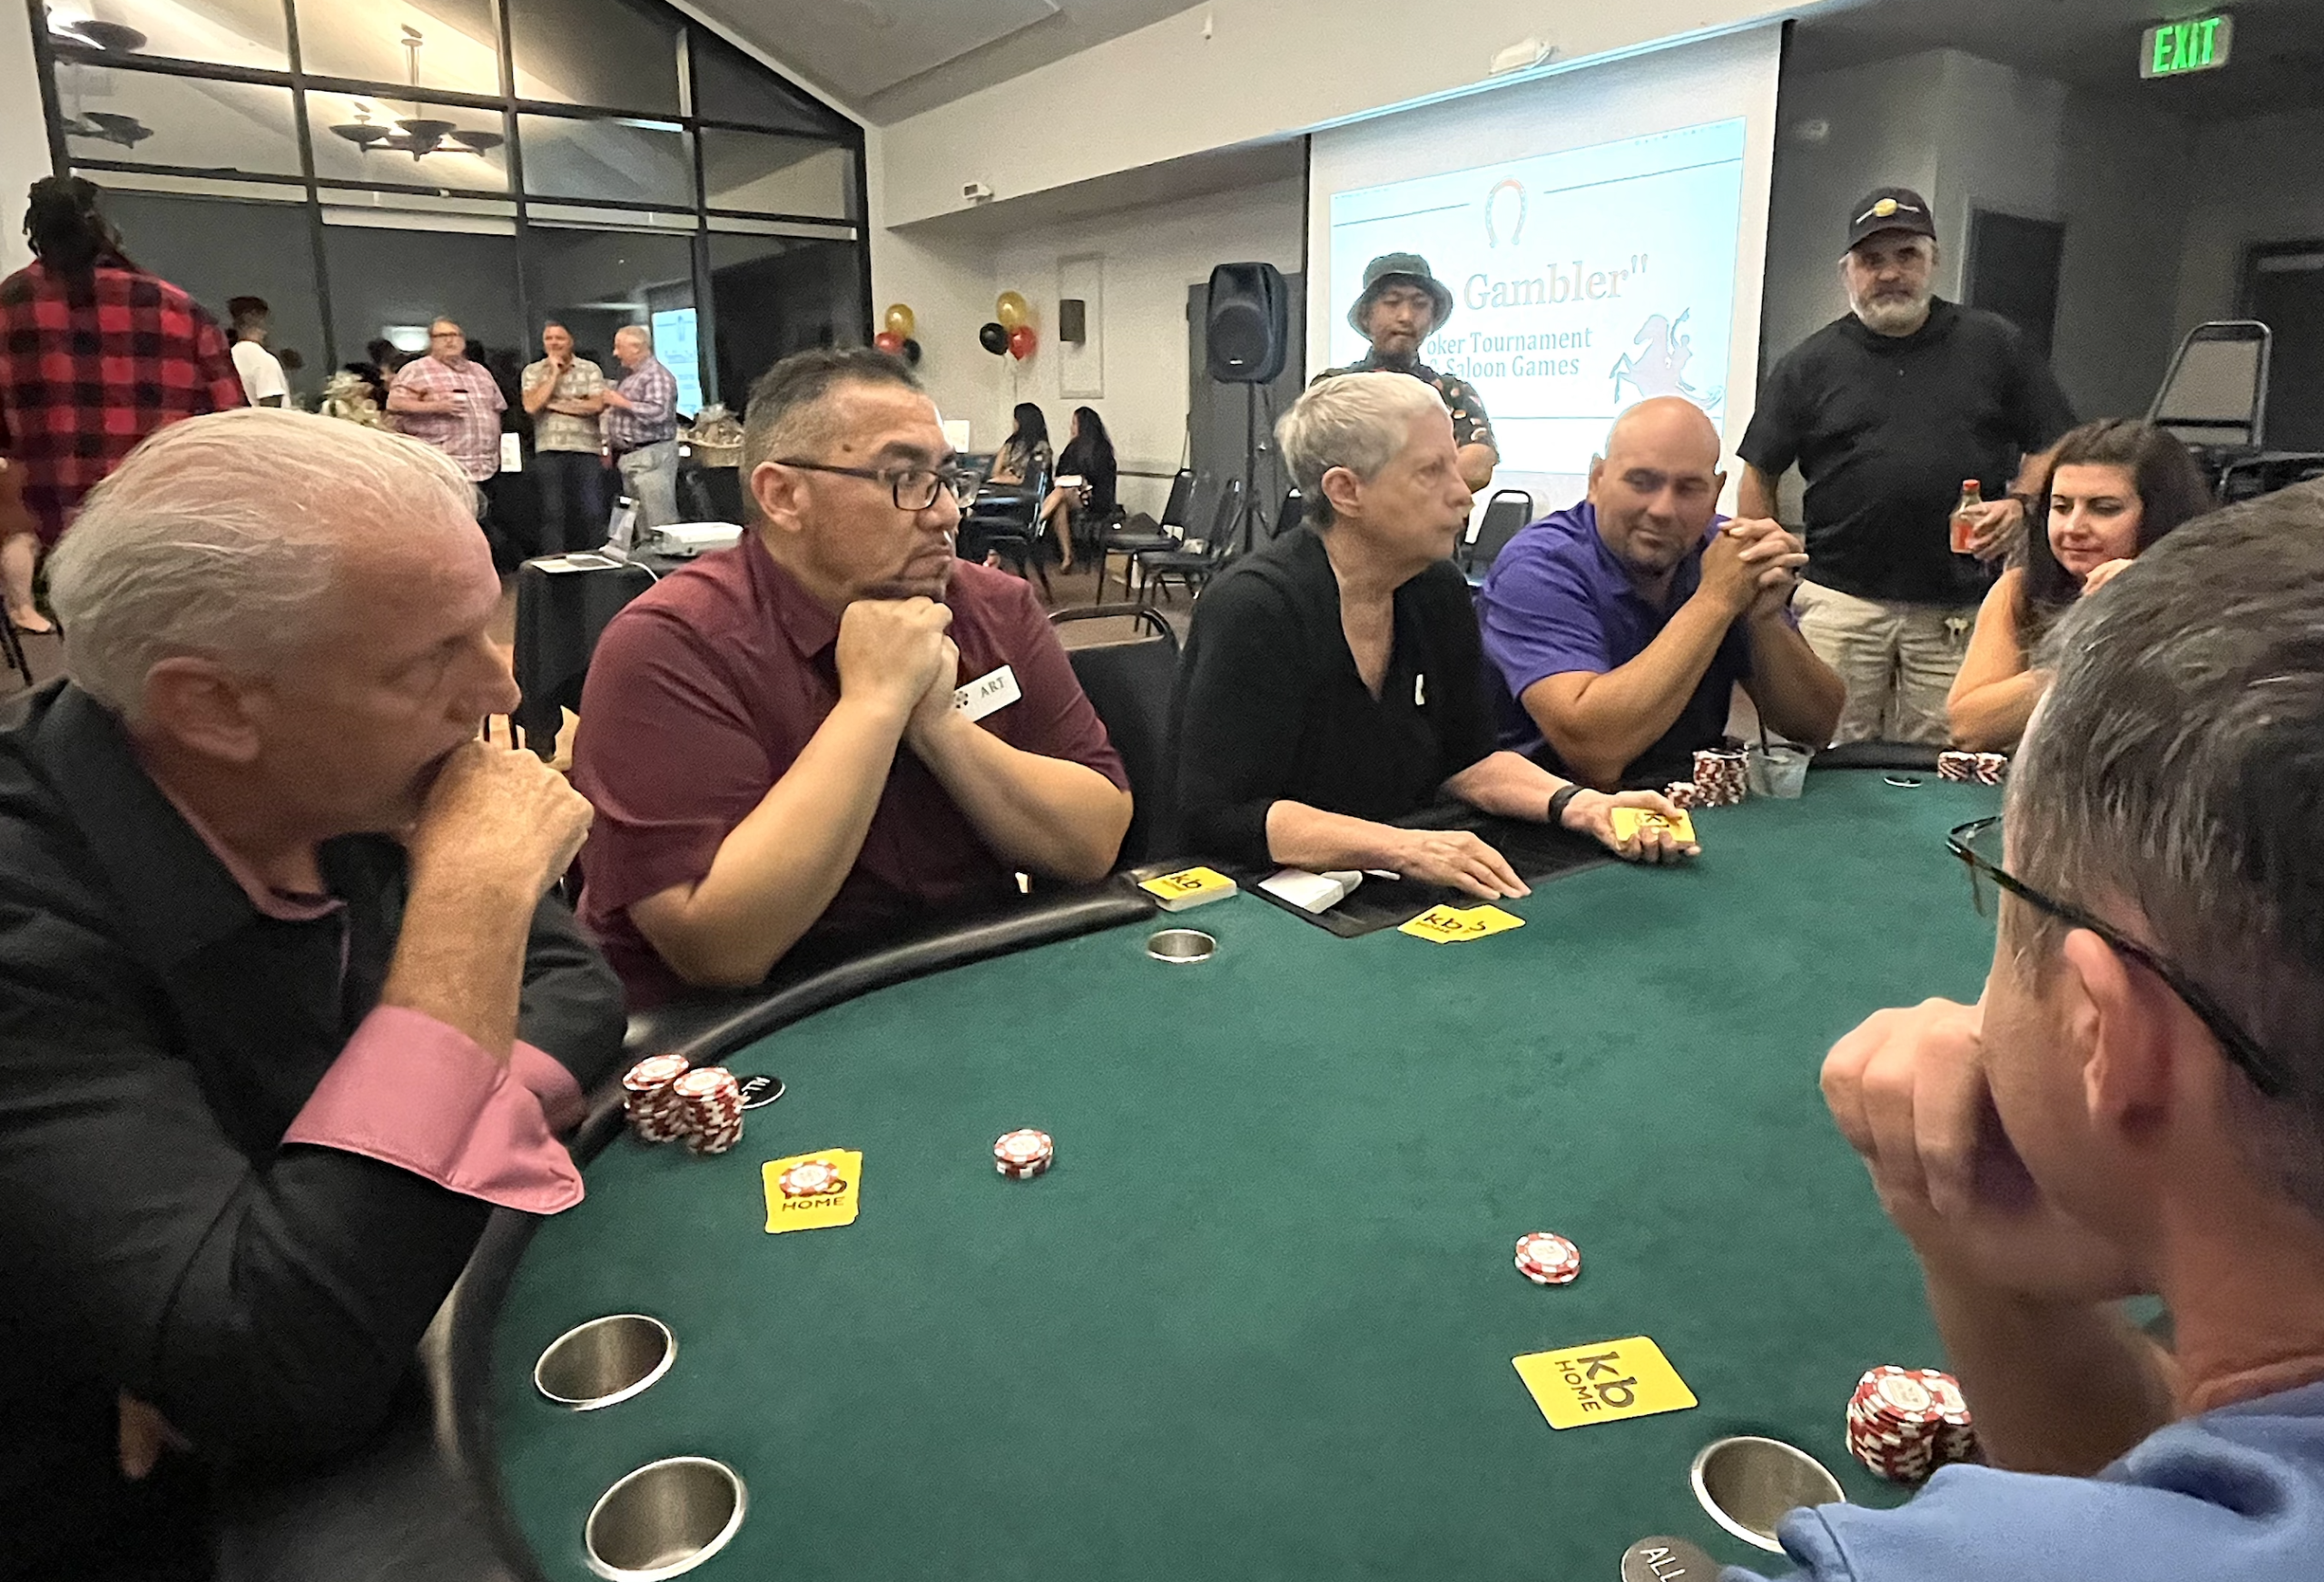 Poker tournament to aid job training for disadvantaged area residents